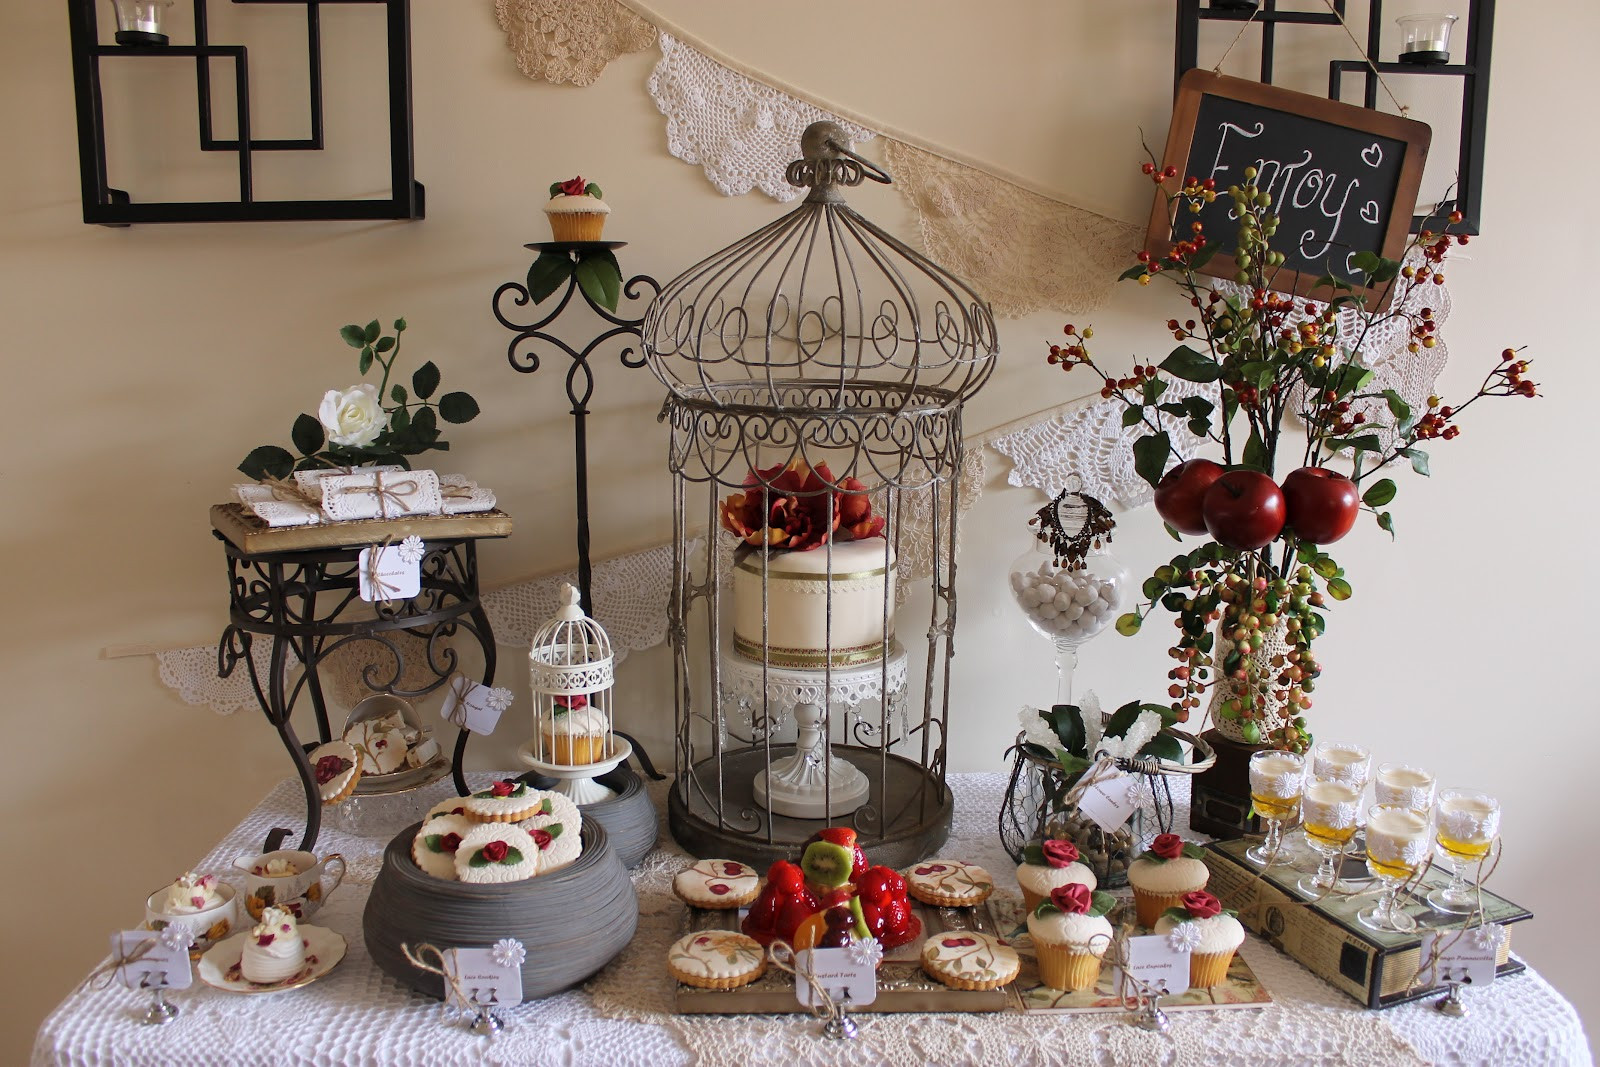 Vintage Birthday Party Decorations
 Events By Nat My Vintage Rose and Doily Inspired 32nd